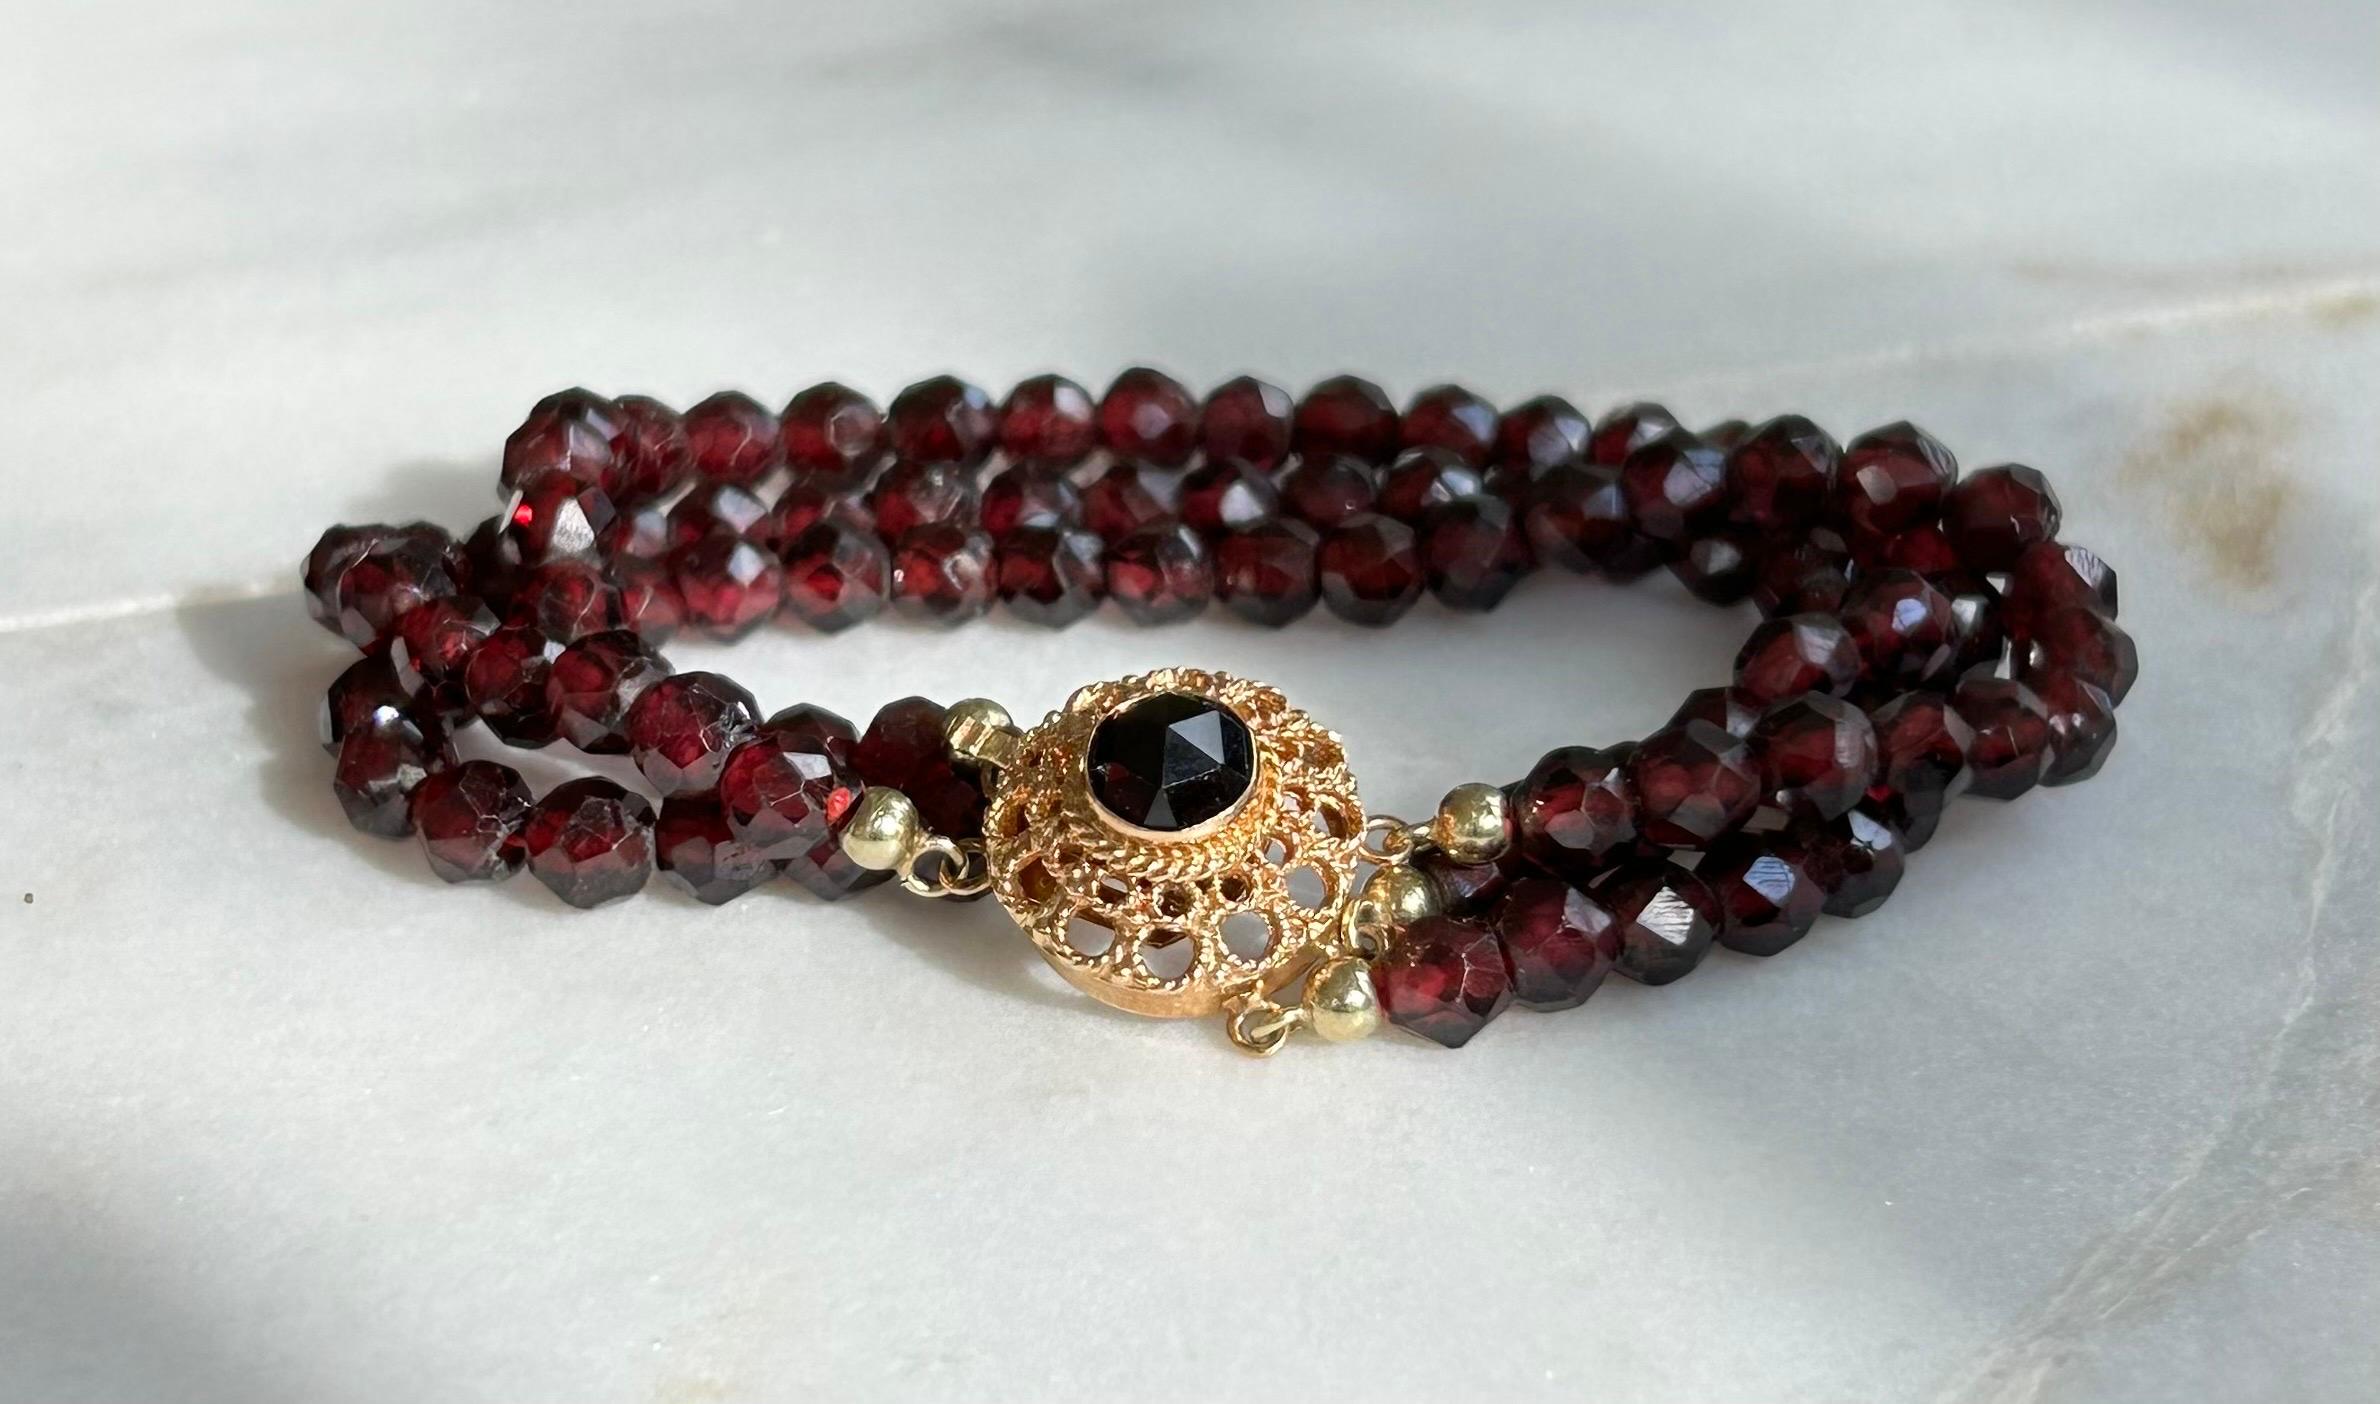 Vintage Victorian three strand Rose Cut Garnet Bracelet with 15k Gold Closure In Excellent Condition For Sale In Joelton, TN